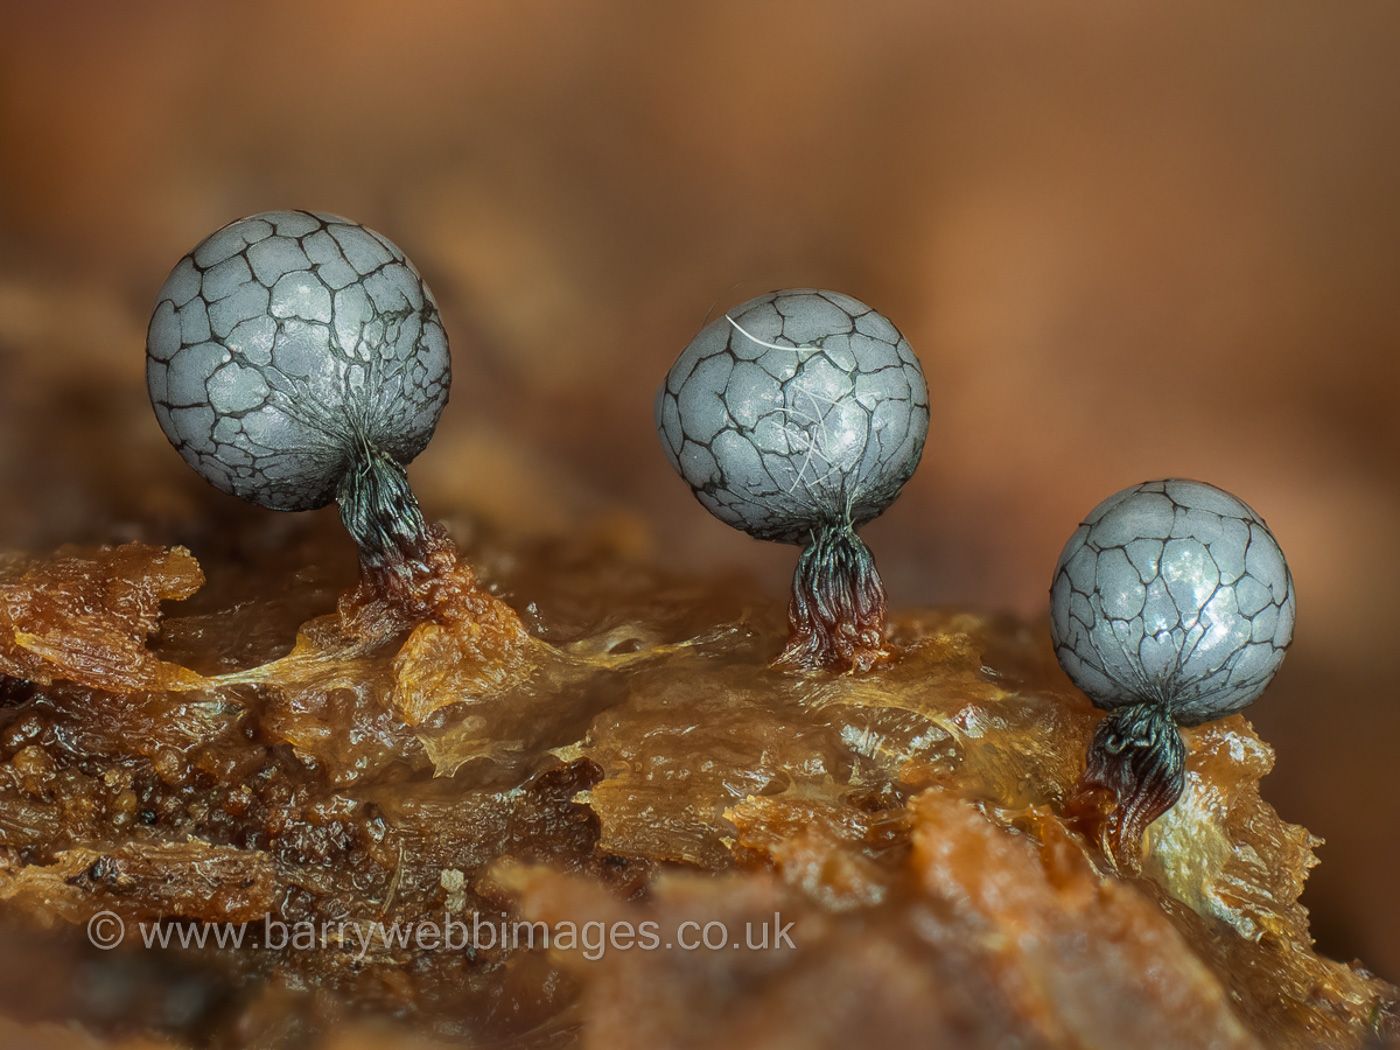 Stock photo of Slime mould (Lamproderma scintillans) growing on